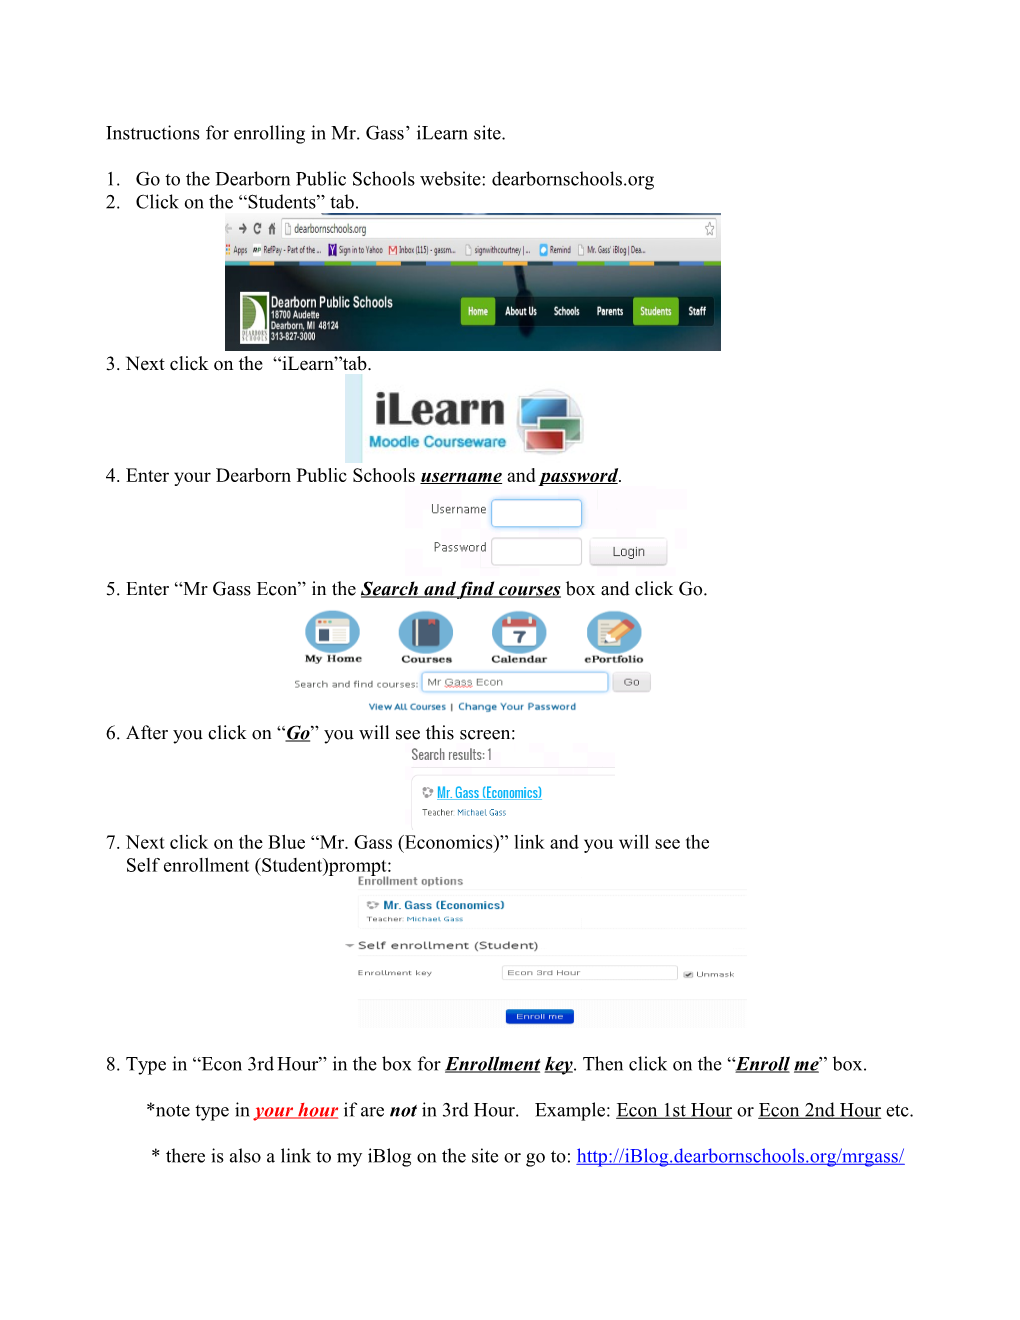 Instructions for Enrolling in Mr. Gass Ilearn Site